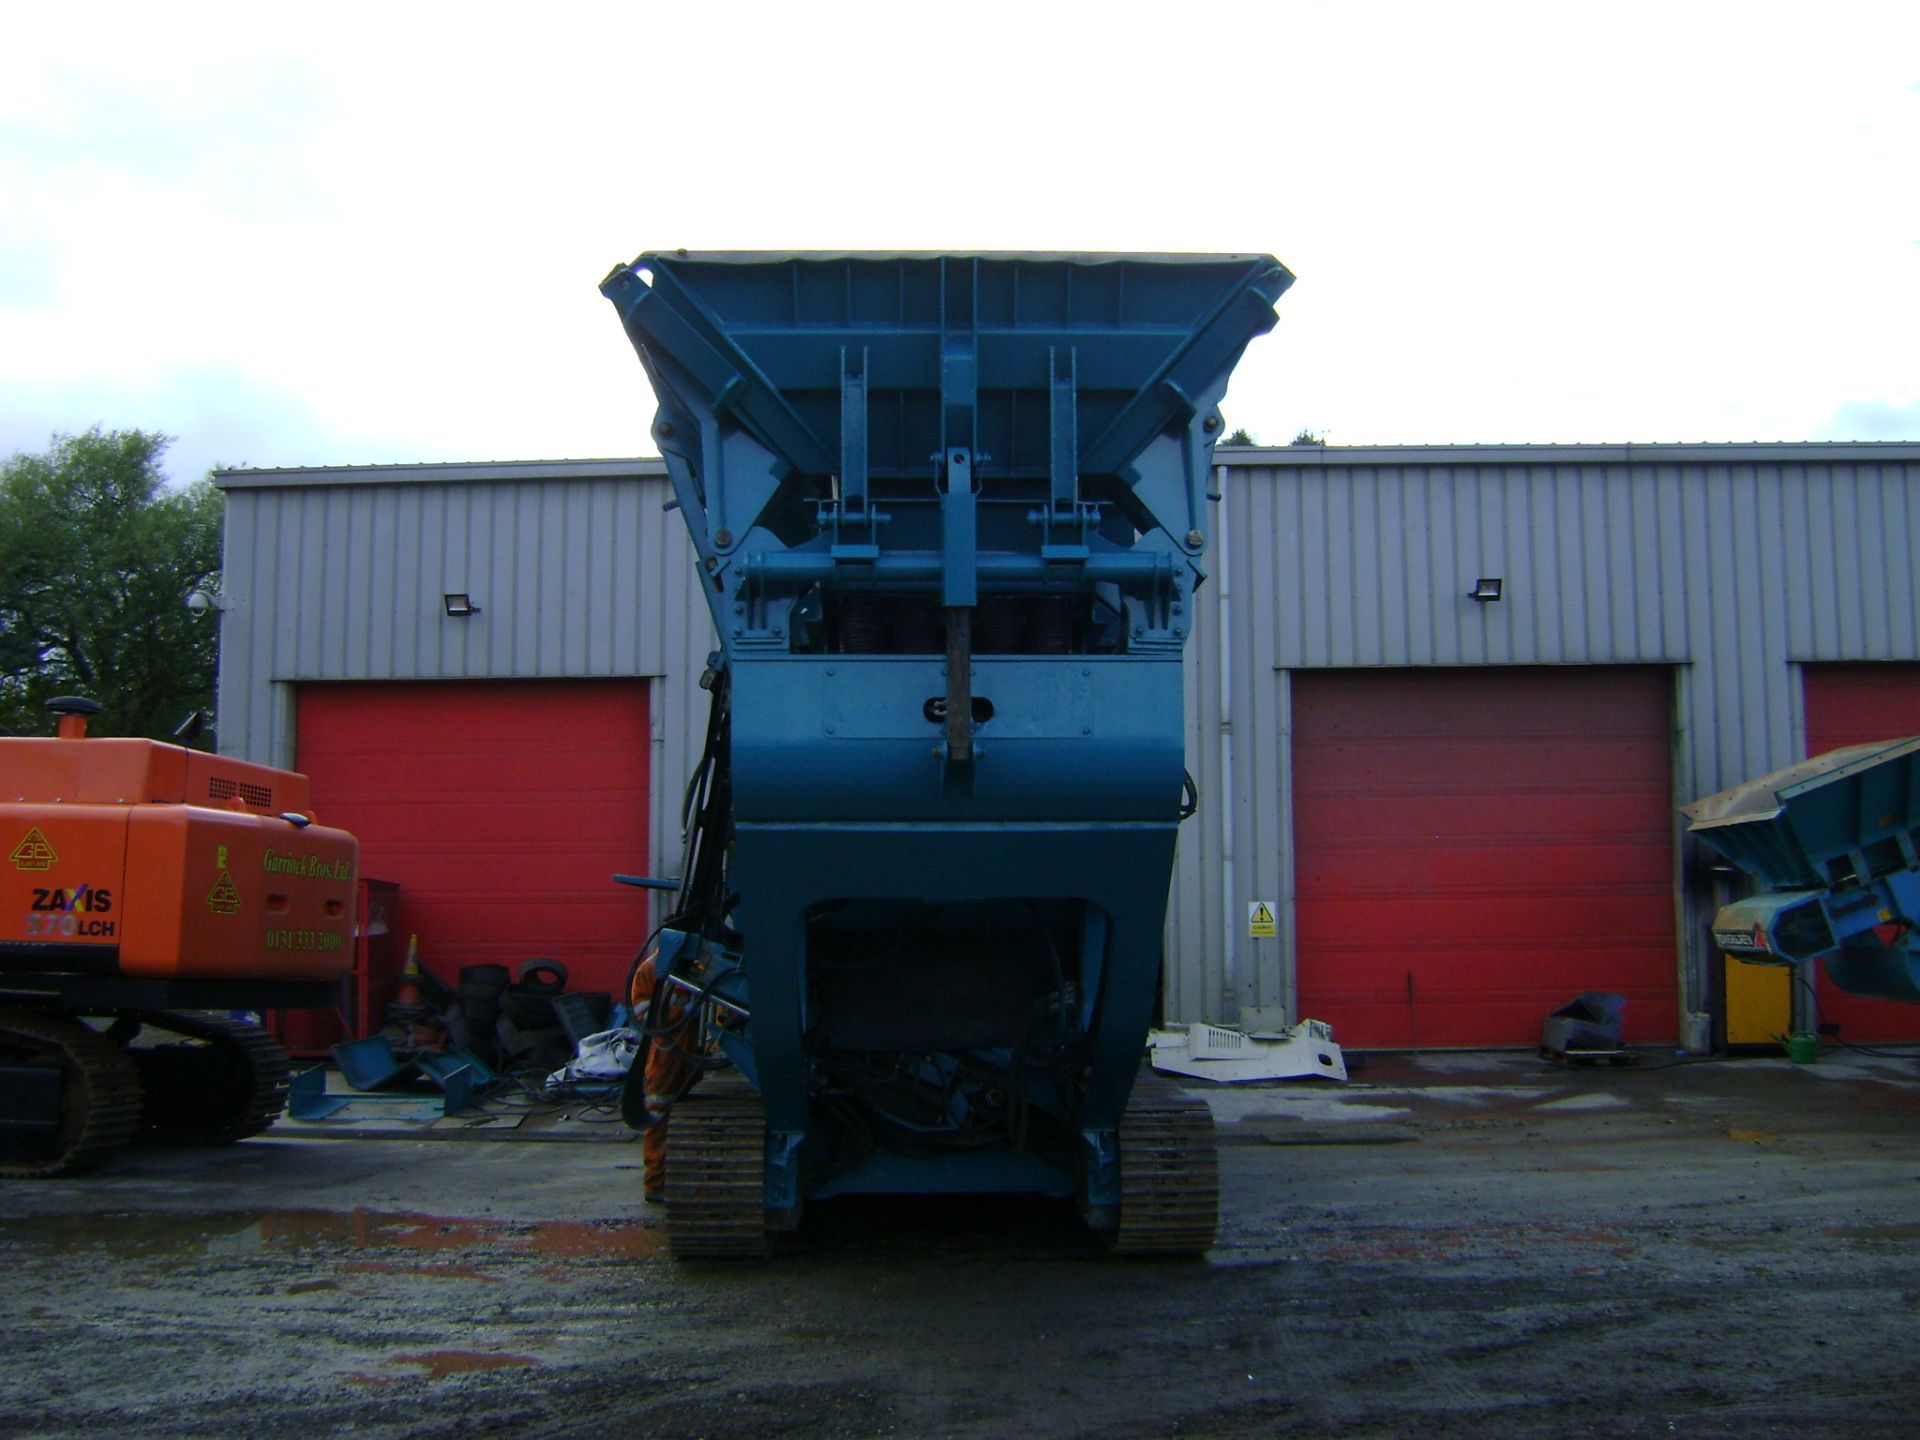 Pegson XA400S Tracked Jaw Crusher - Image 6 of 8